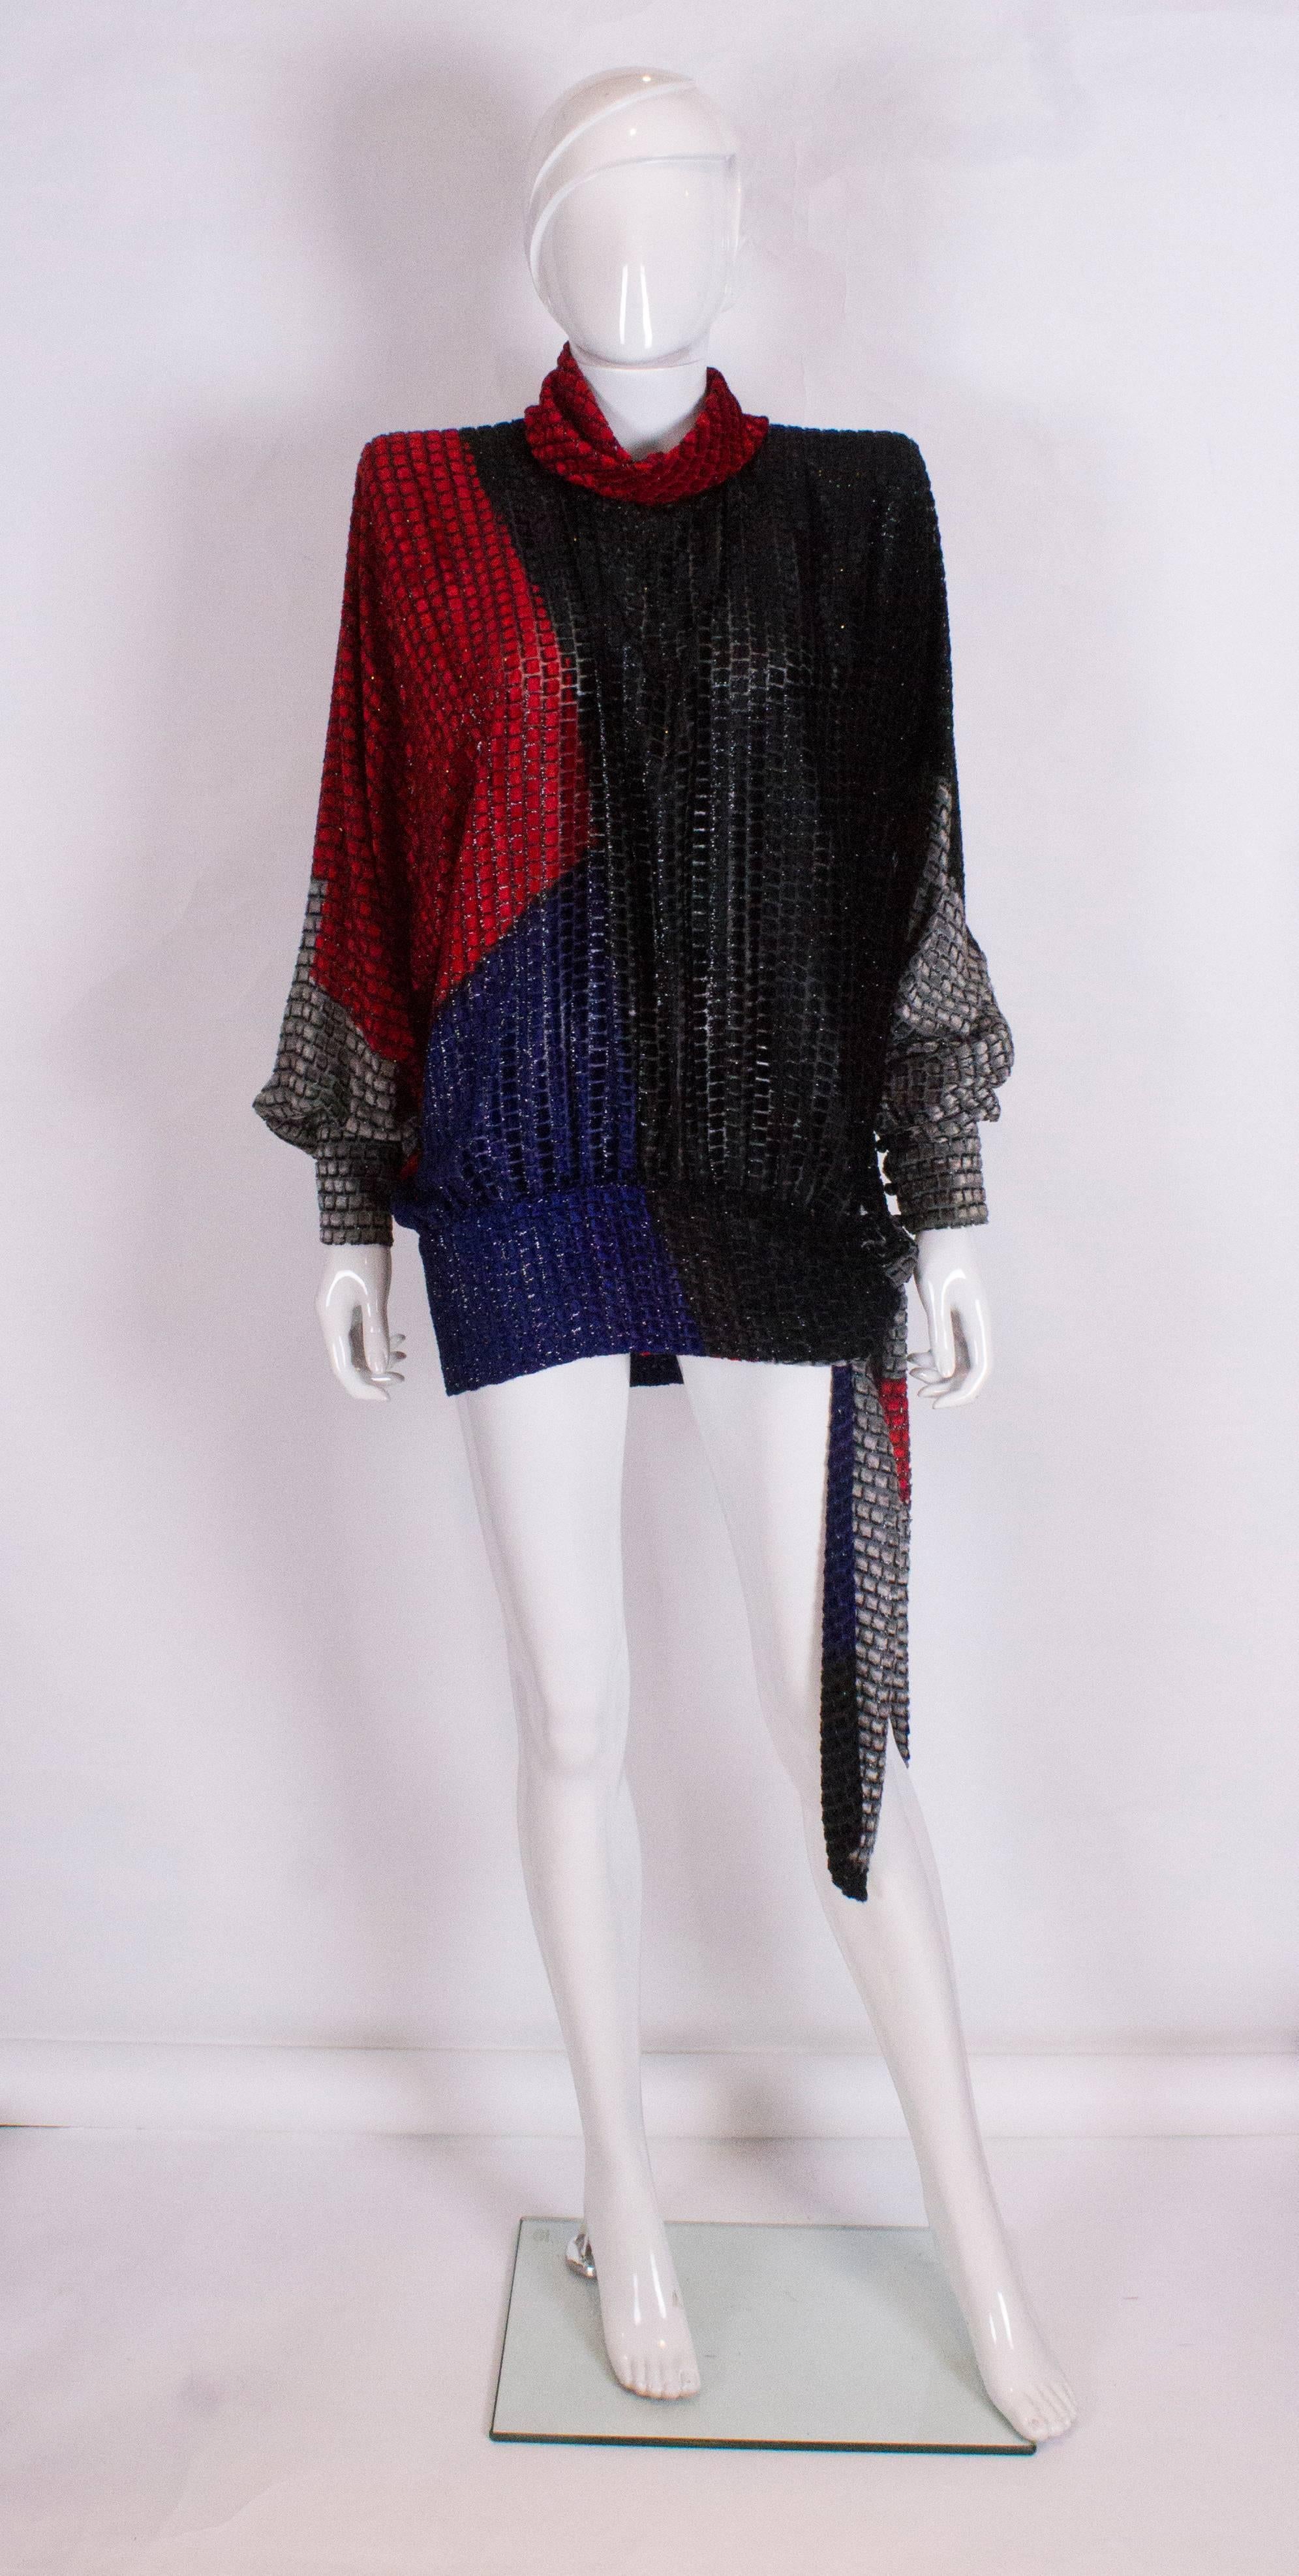 A great top by Italian designer Andrea Odicini. The top is a wonderful mix of red, blue, grey and black square with a black background. The top has a tie at waist leval, a button neck and 4 button wide cuffs. The top should be worn loose, but can